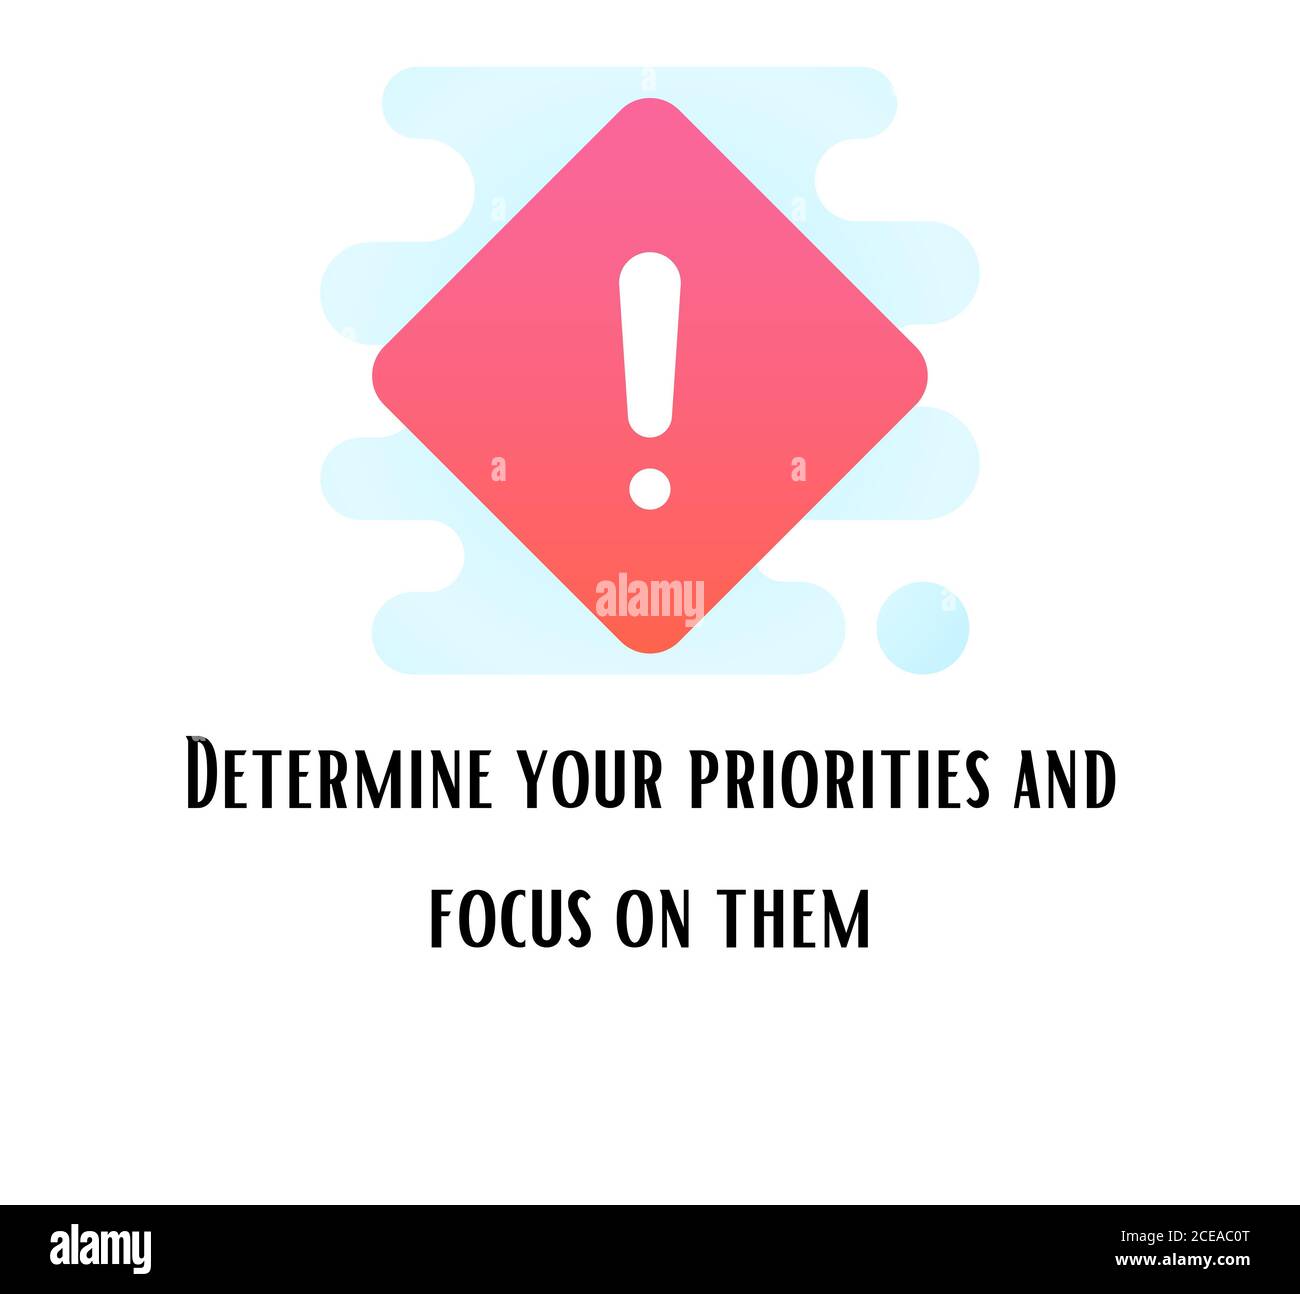 Determine your priorities and focus on them Stock Photo